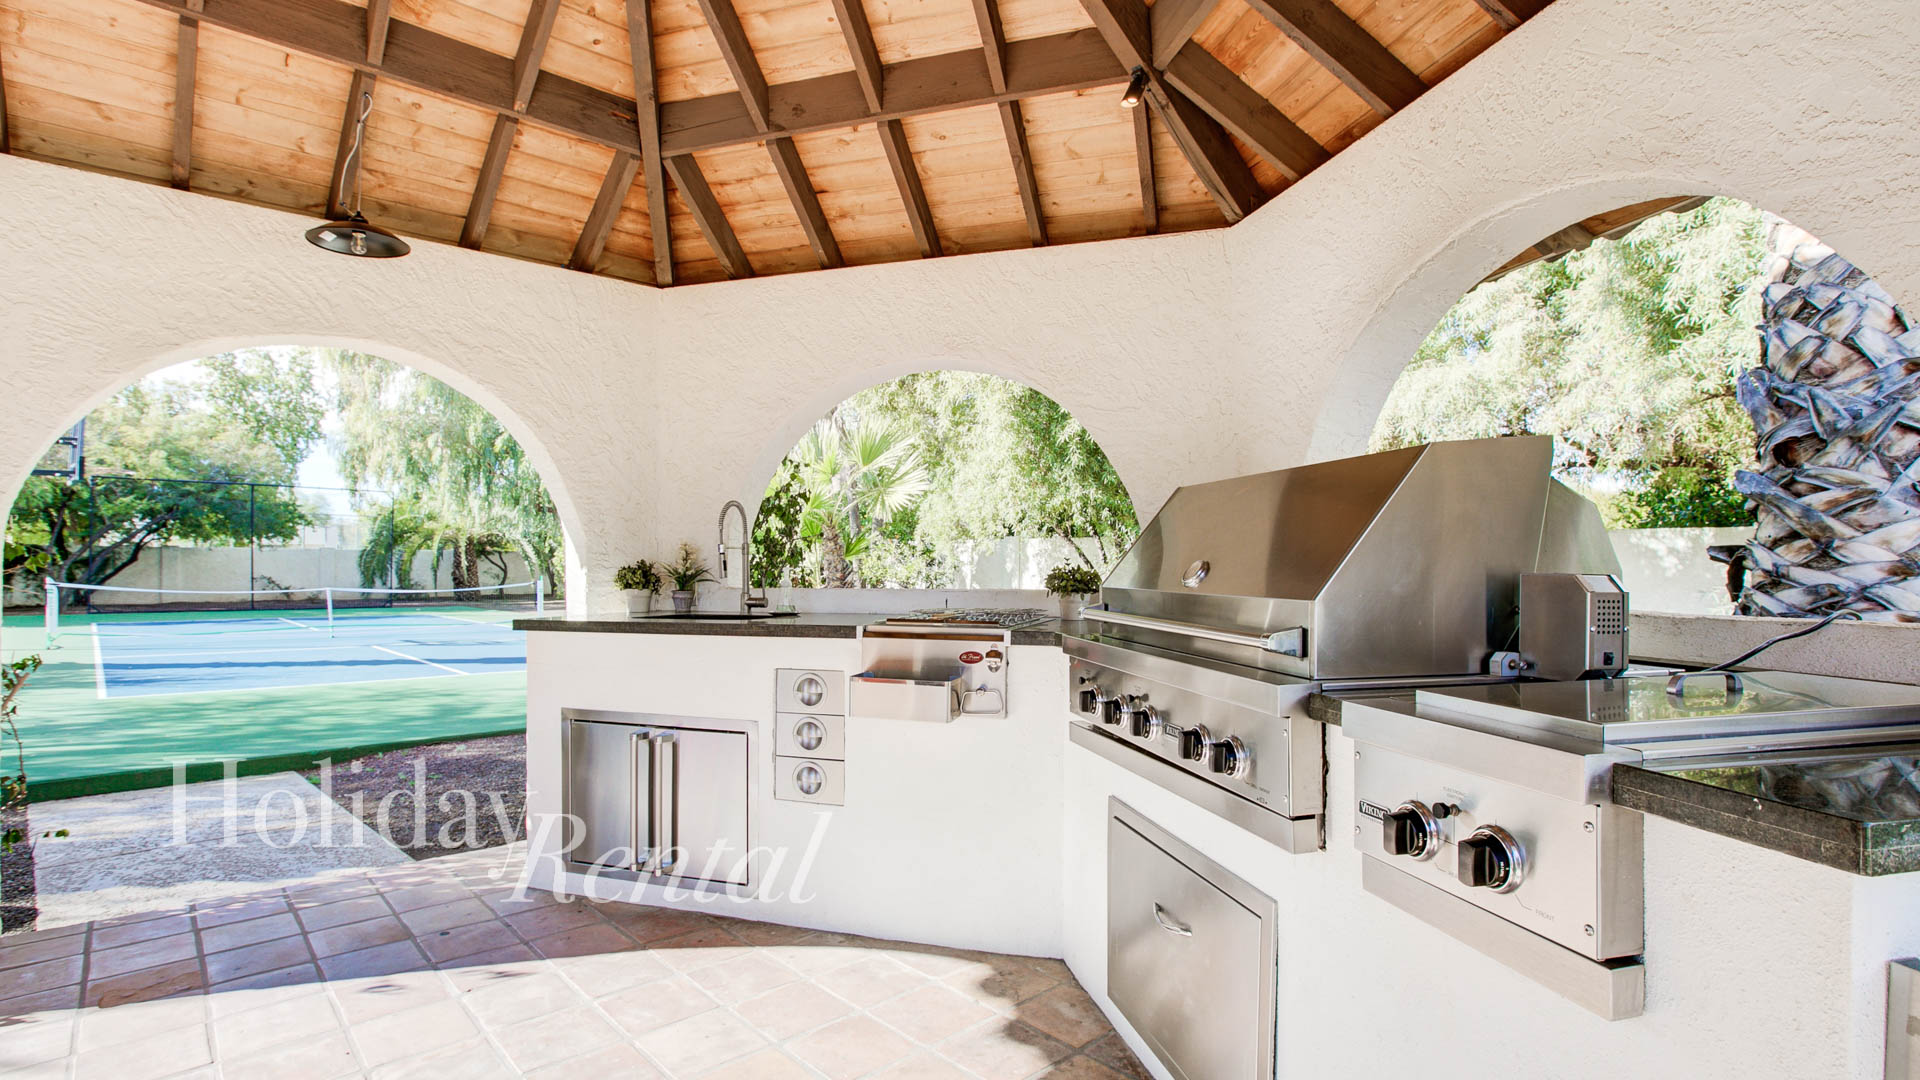 outdoor grill and kitchen area luxury vacation rental